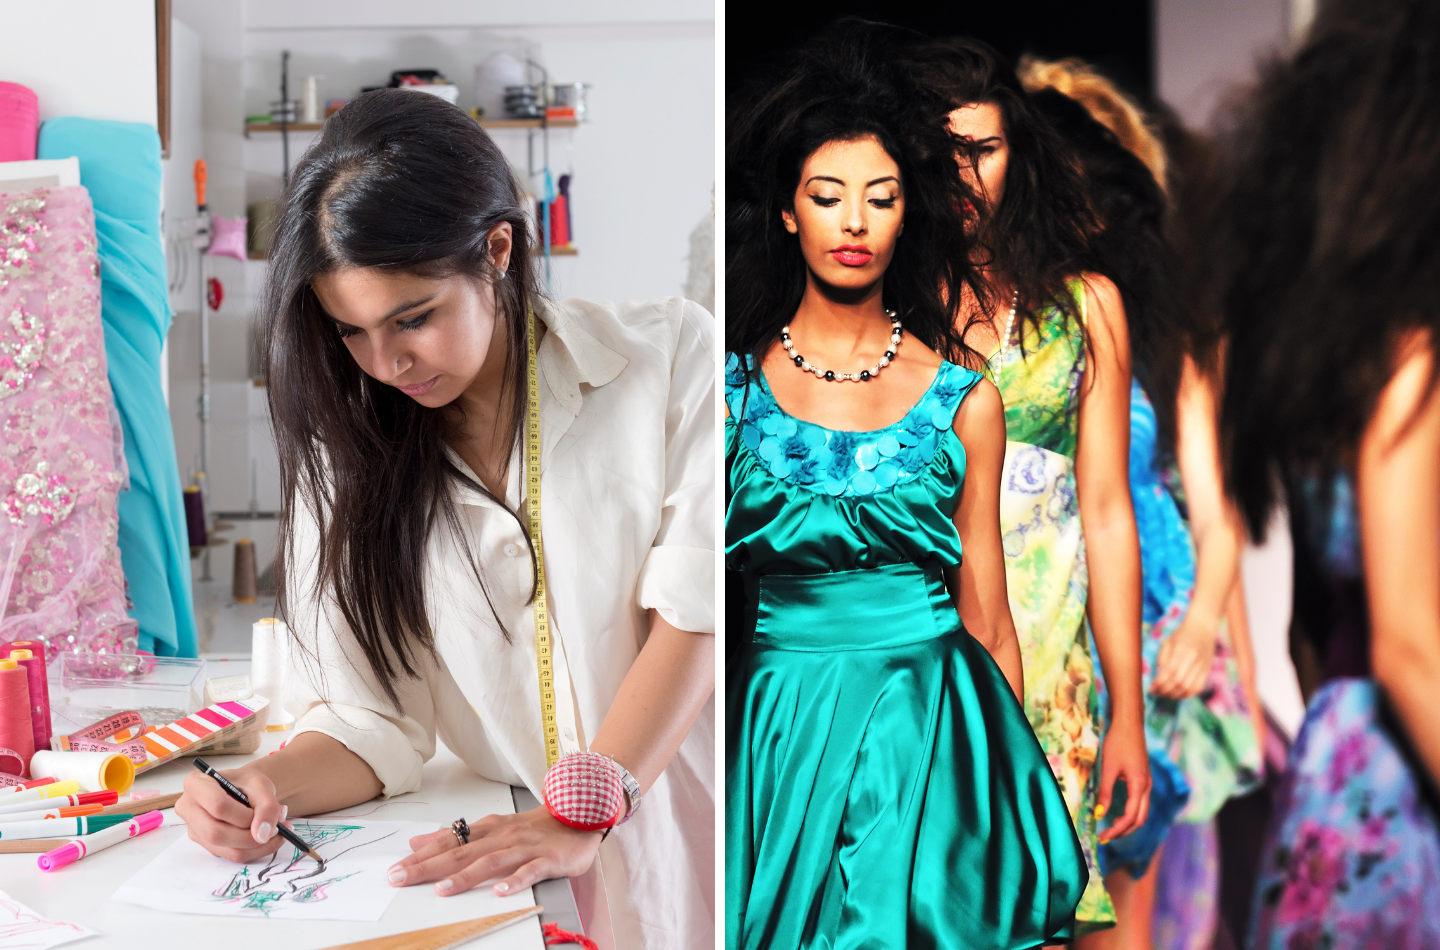 Fashion Struck? Choose From These Great Career Options in Fashion Industry